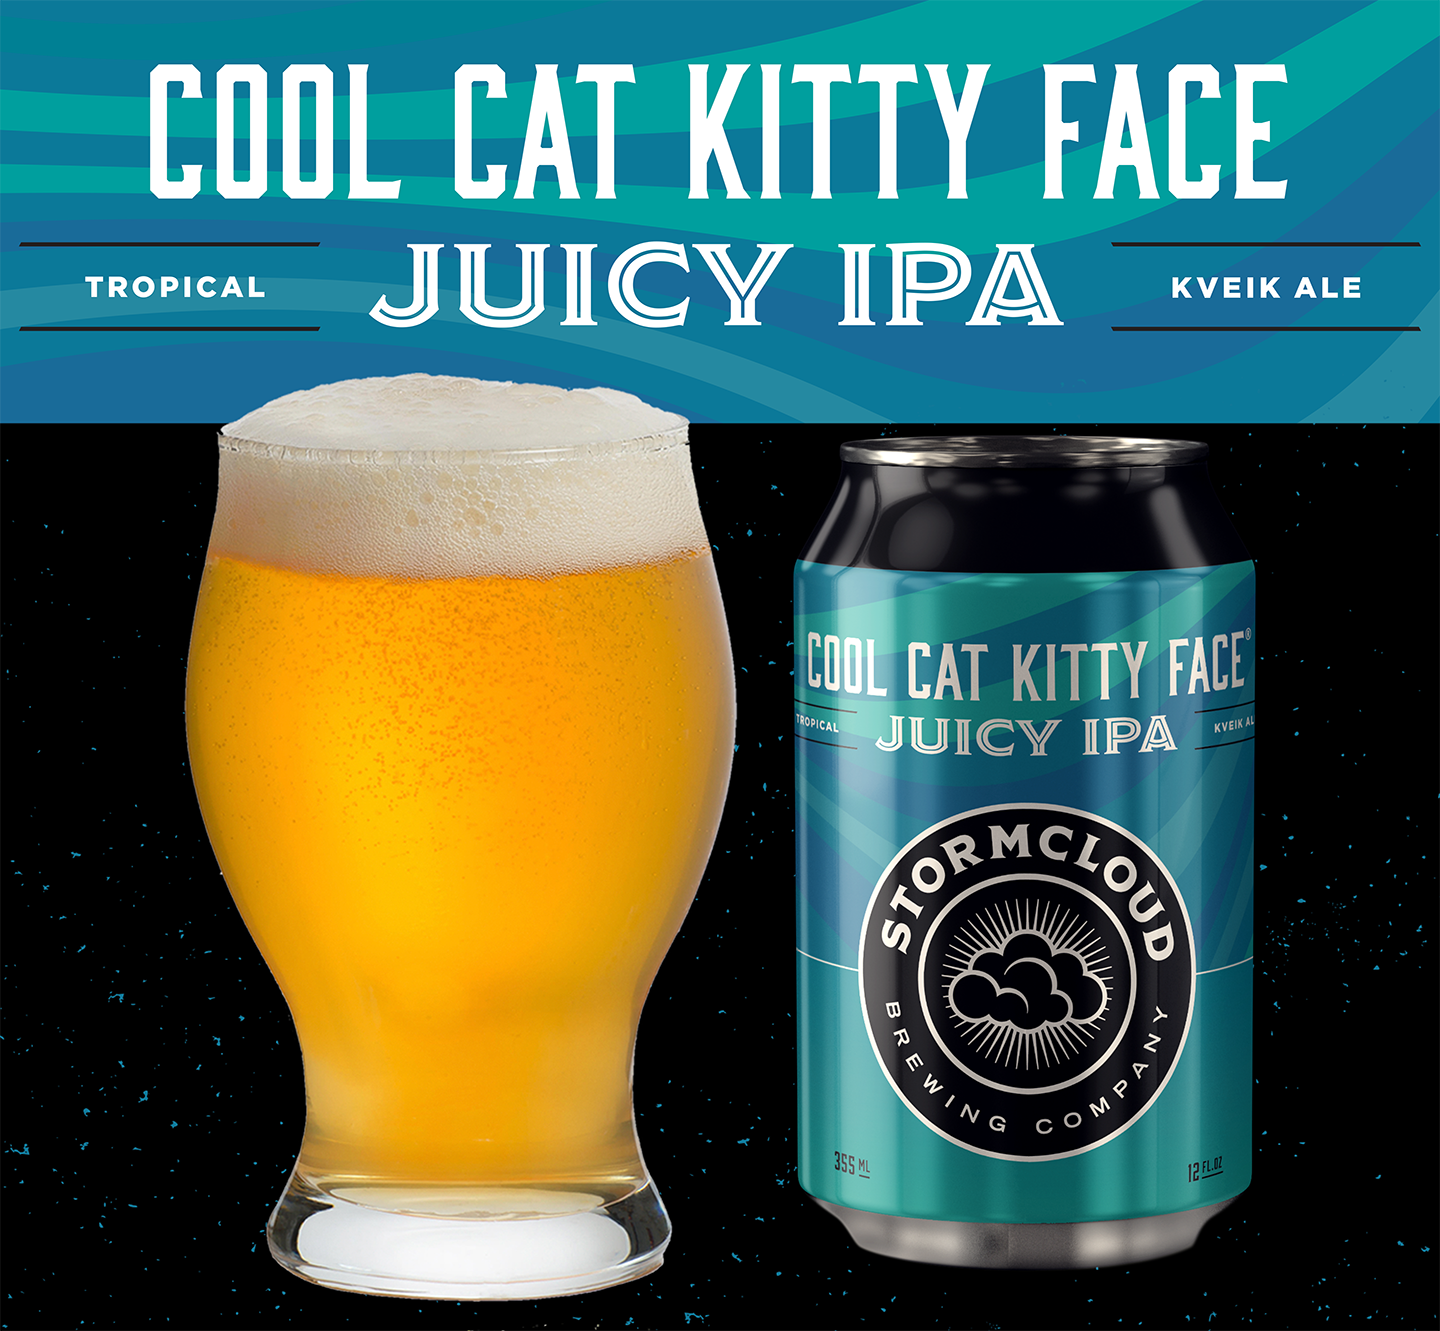 Cool Cat Kitty Face Untappd Image.png